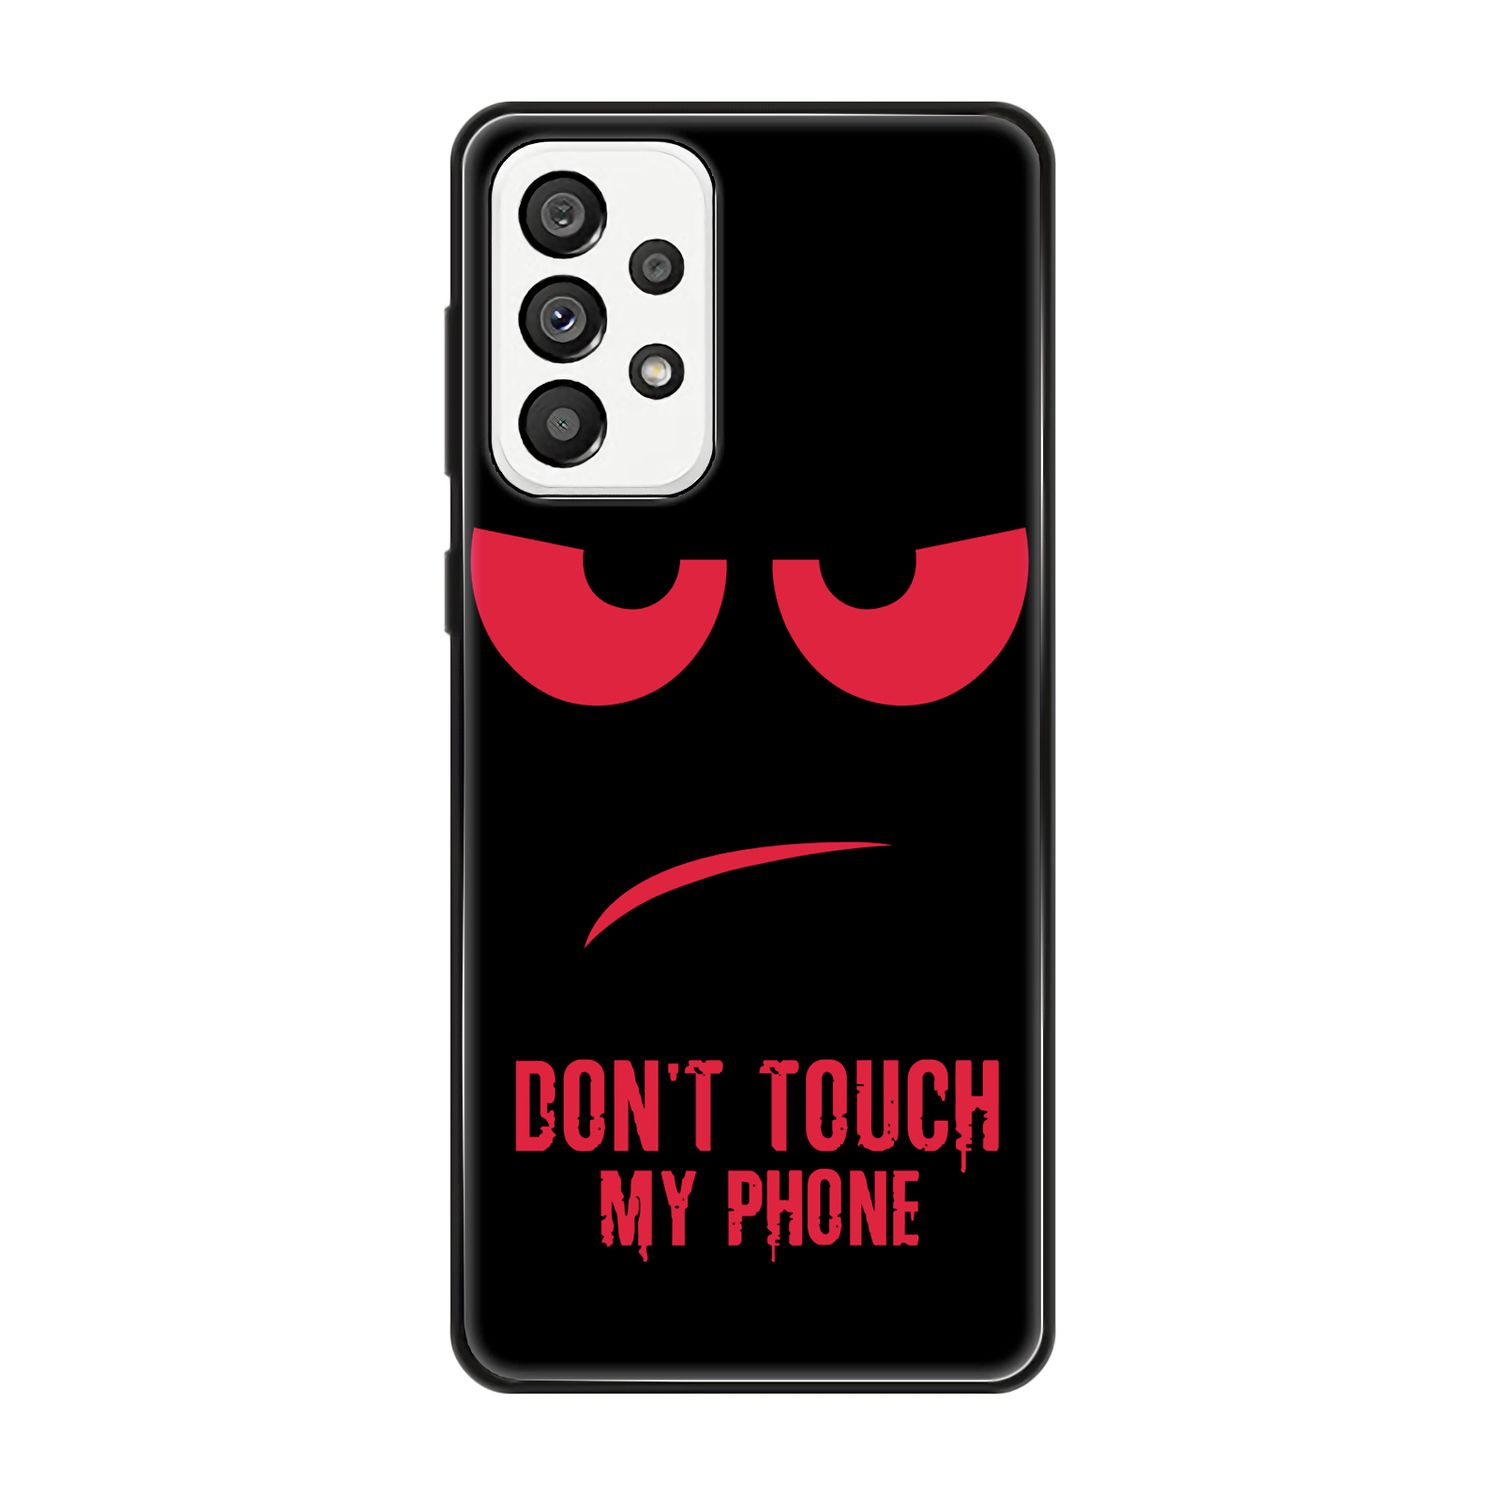 KÖNIG DESIGN Case, Backcover, Samsung, Rot Galaxy Phone 5G, Dont Touch A73 My